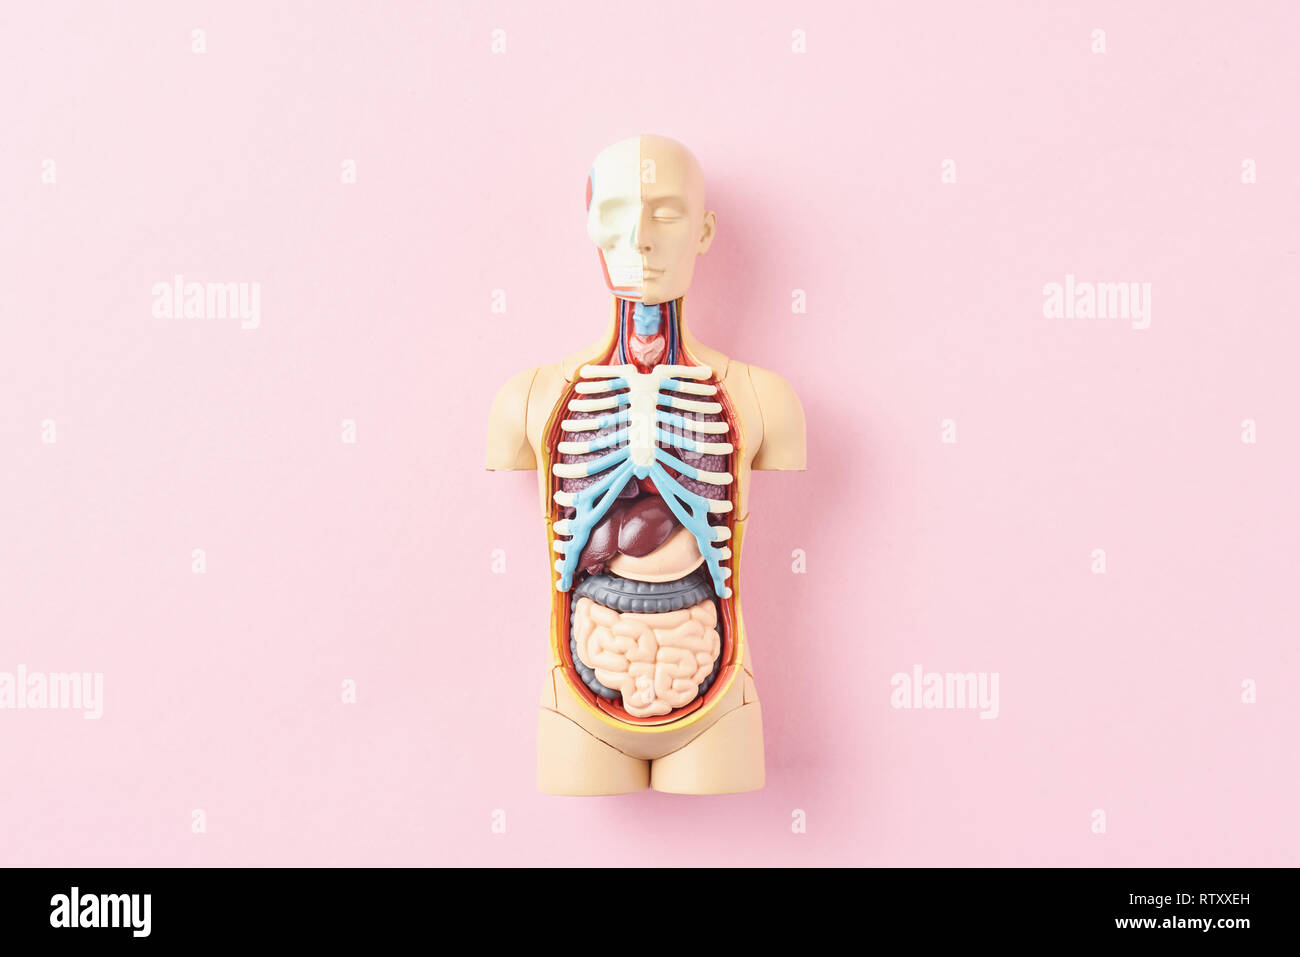 Anatomical Model Of Human Body With Internal Organs On Pink Background Anatomy Body Mannequin Stock Photo Alamy